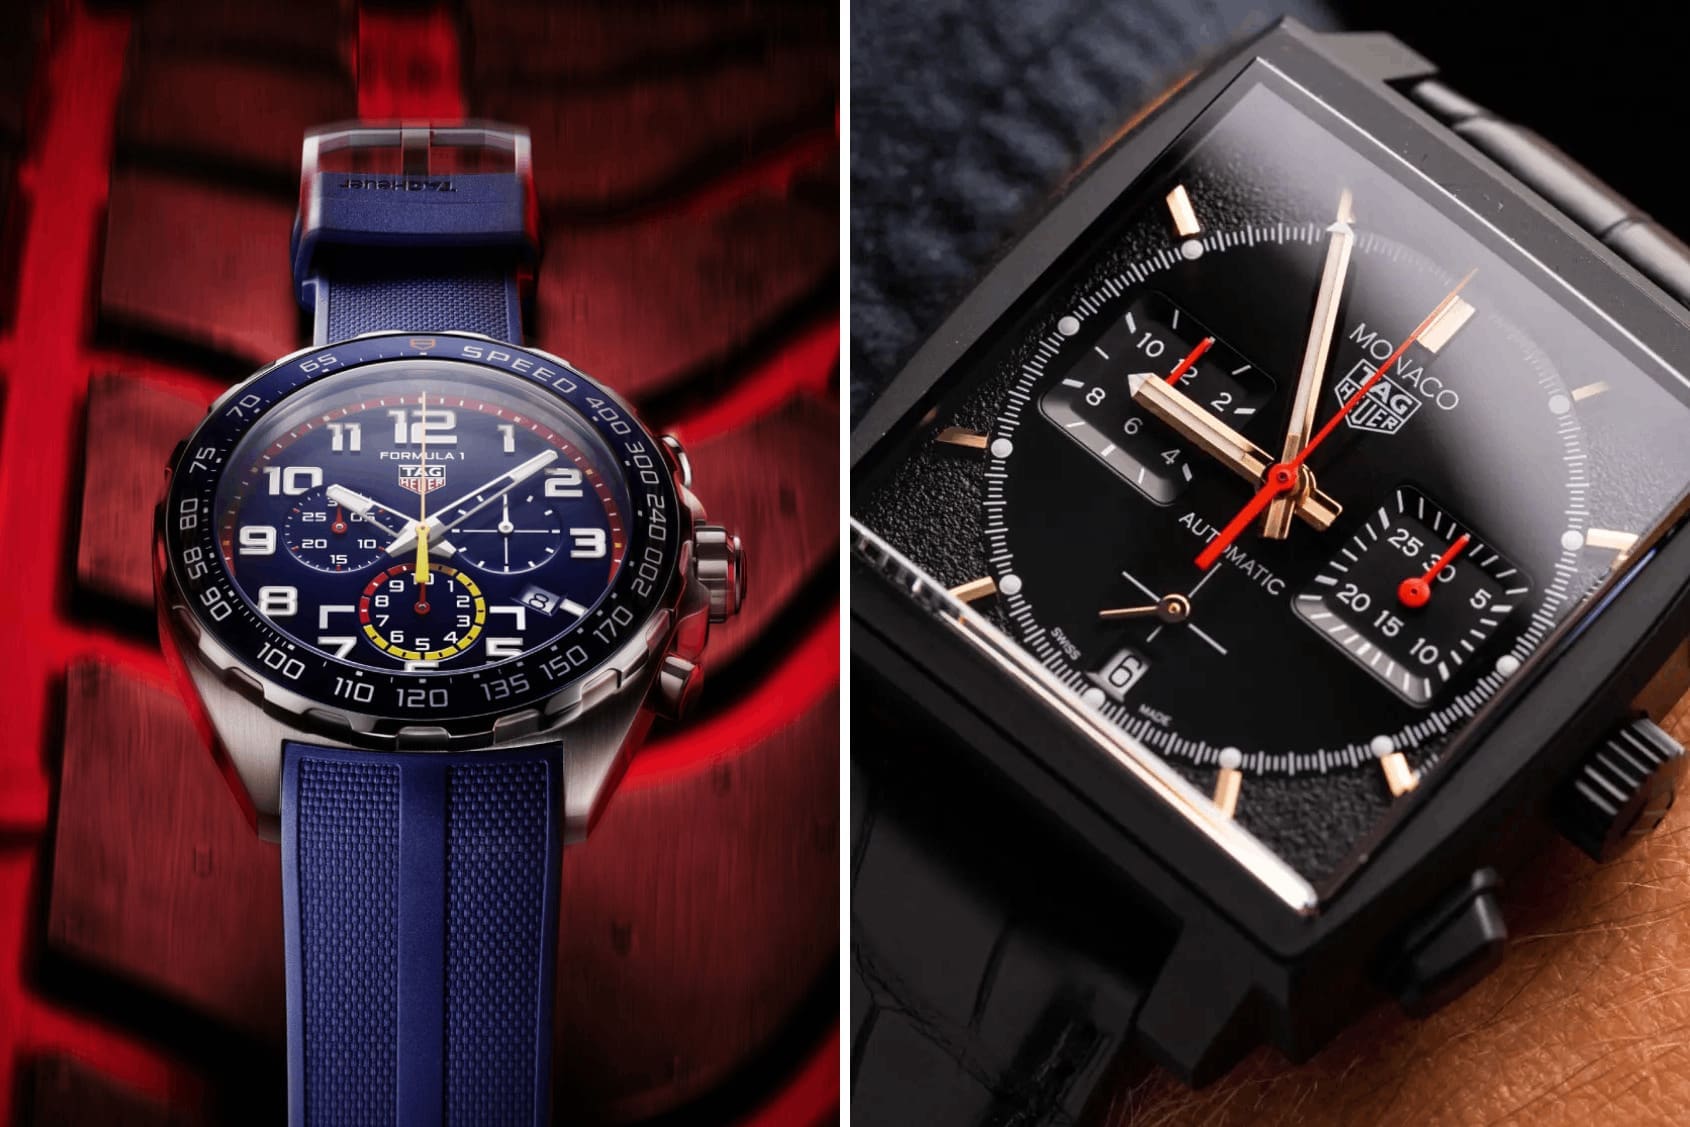 A look at the watches of F1